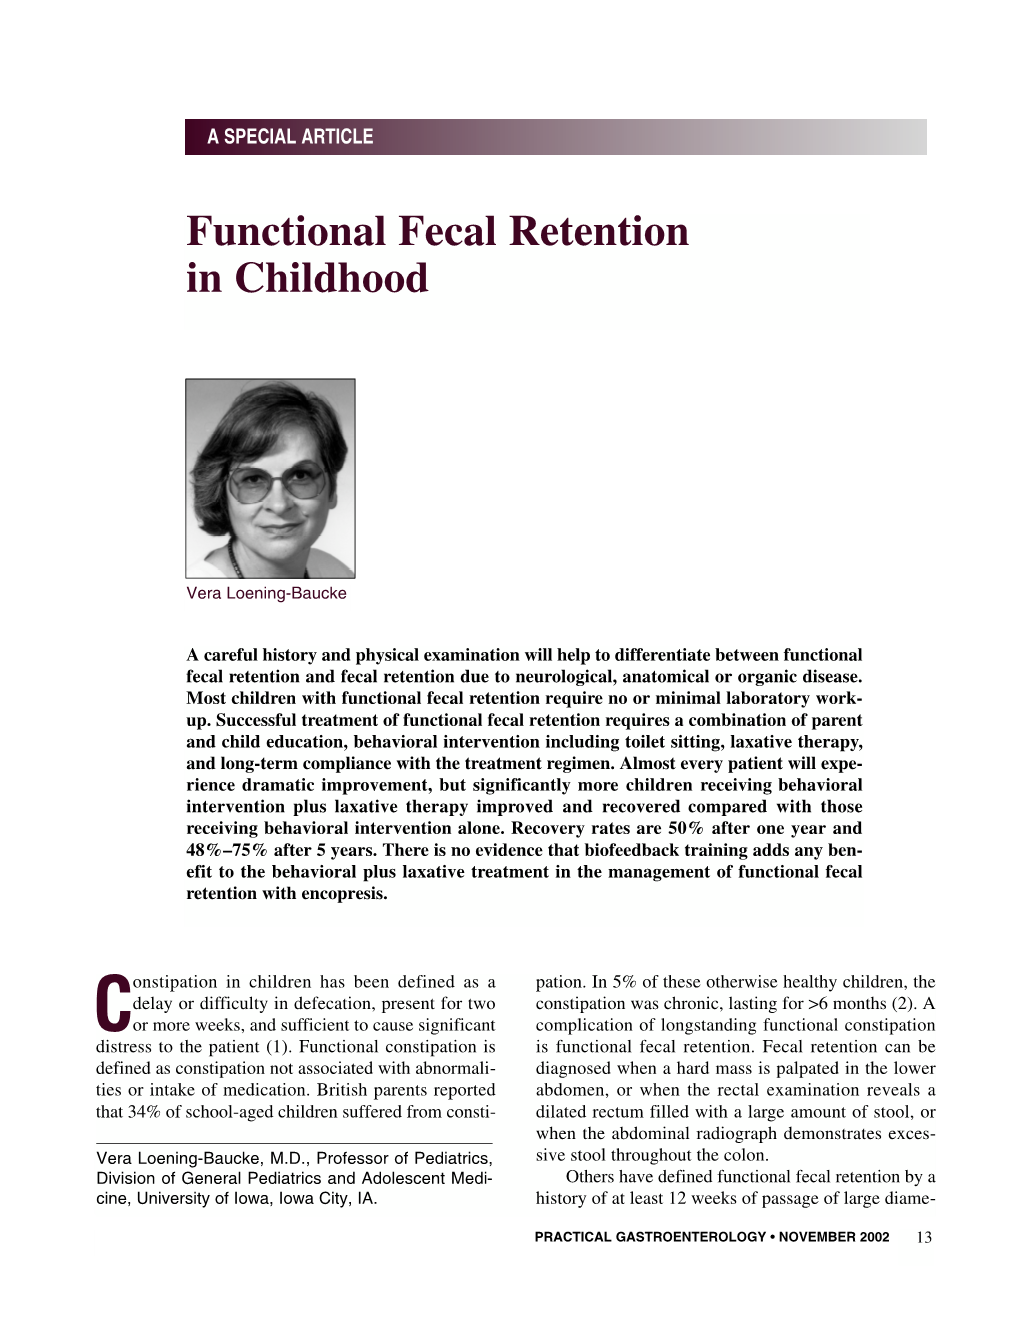 Functional Fecal Retention in Childhood